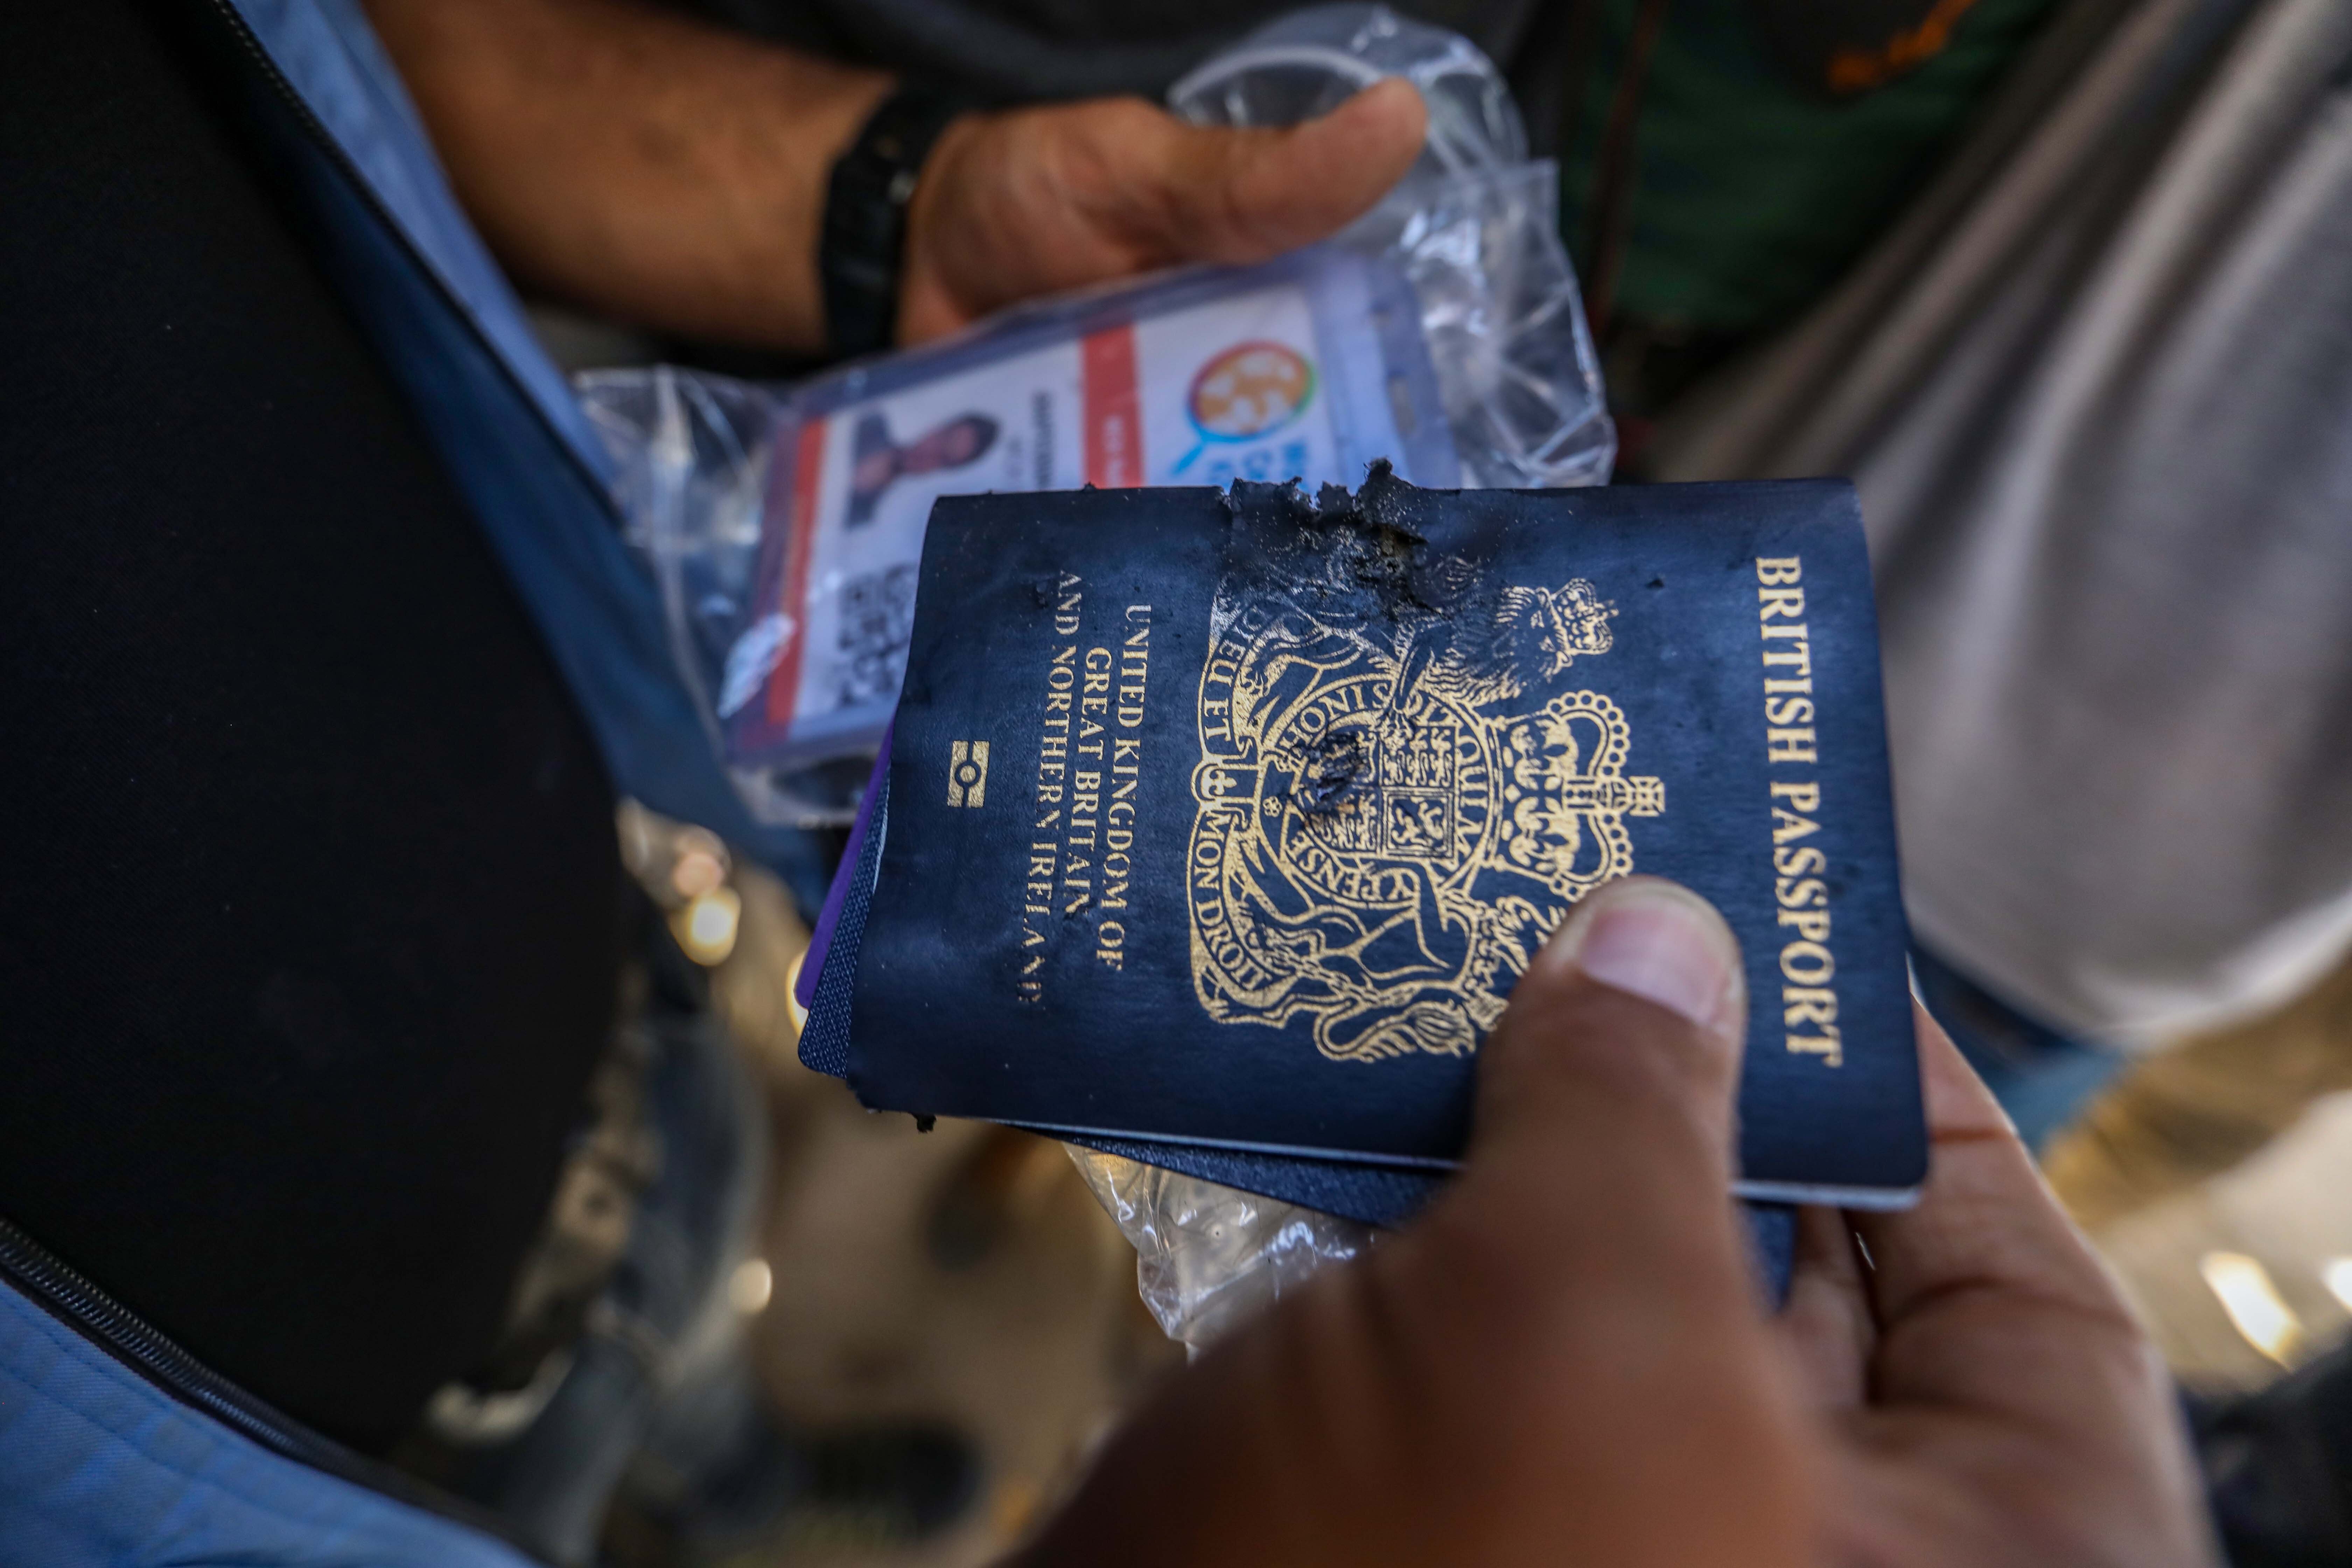 Damaged British passport held by a person, indicating an event affecting travelers or citizens